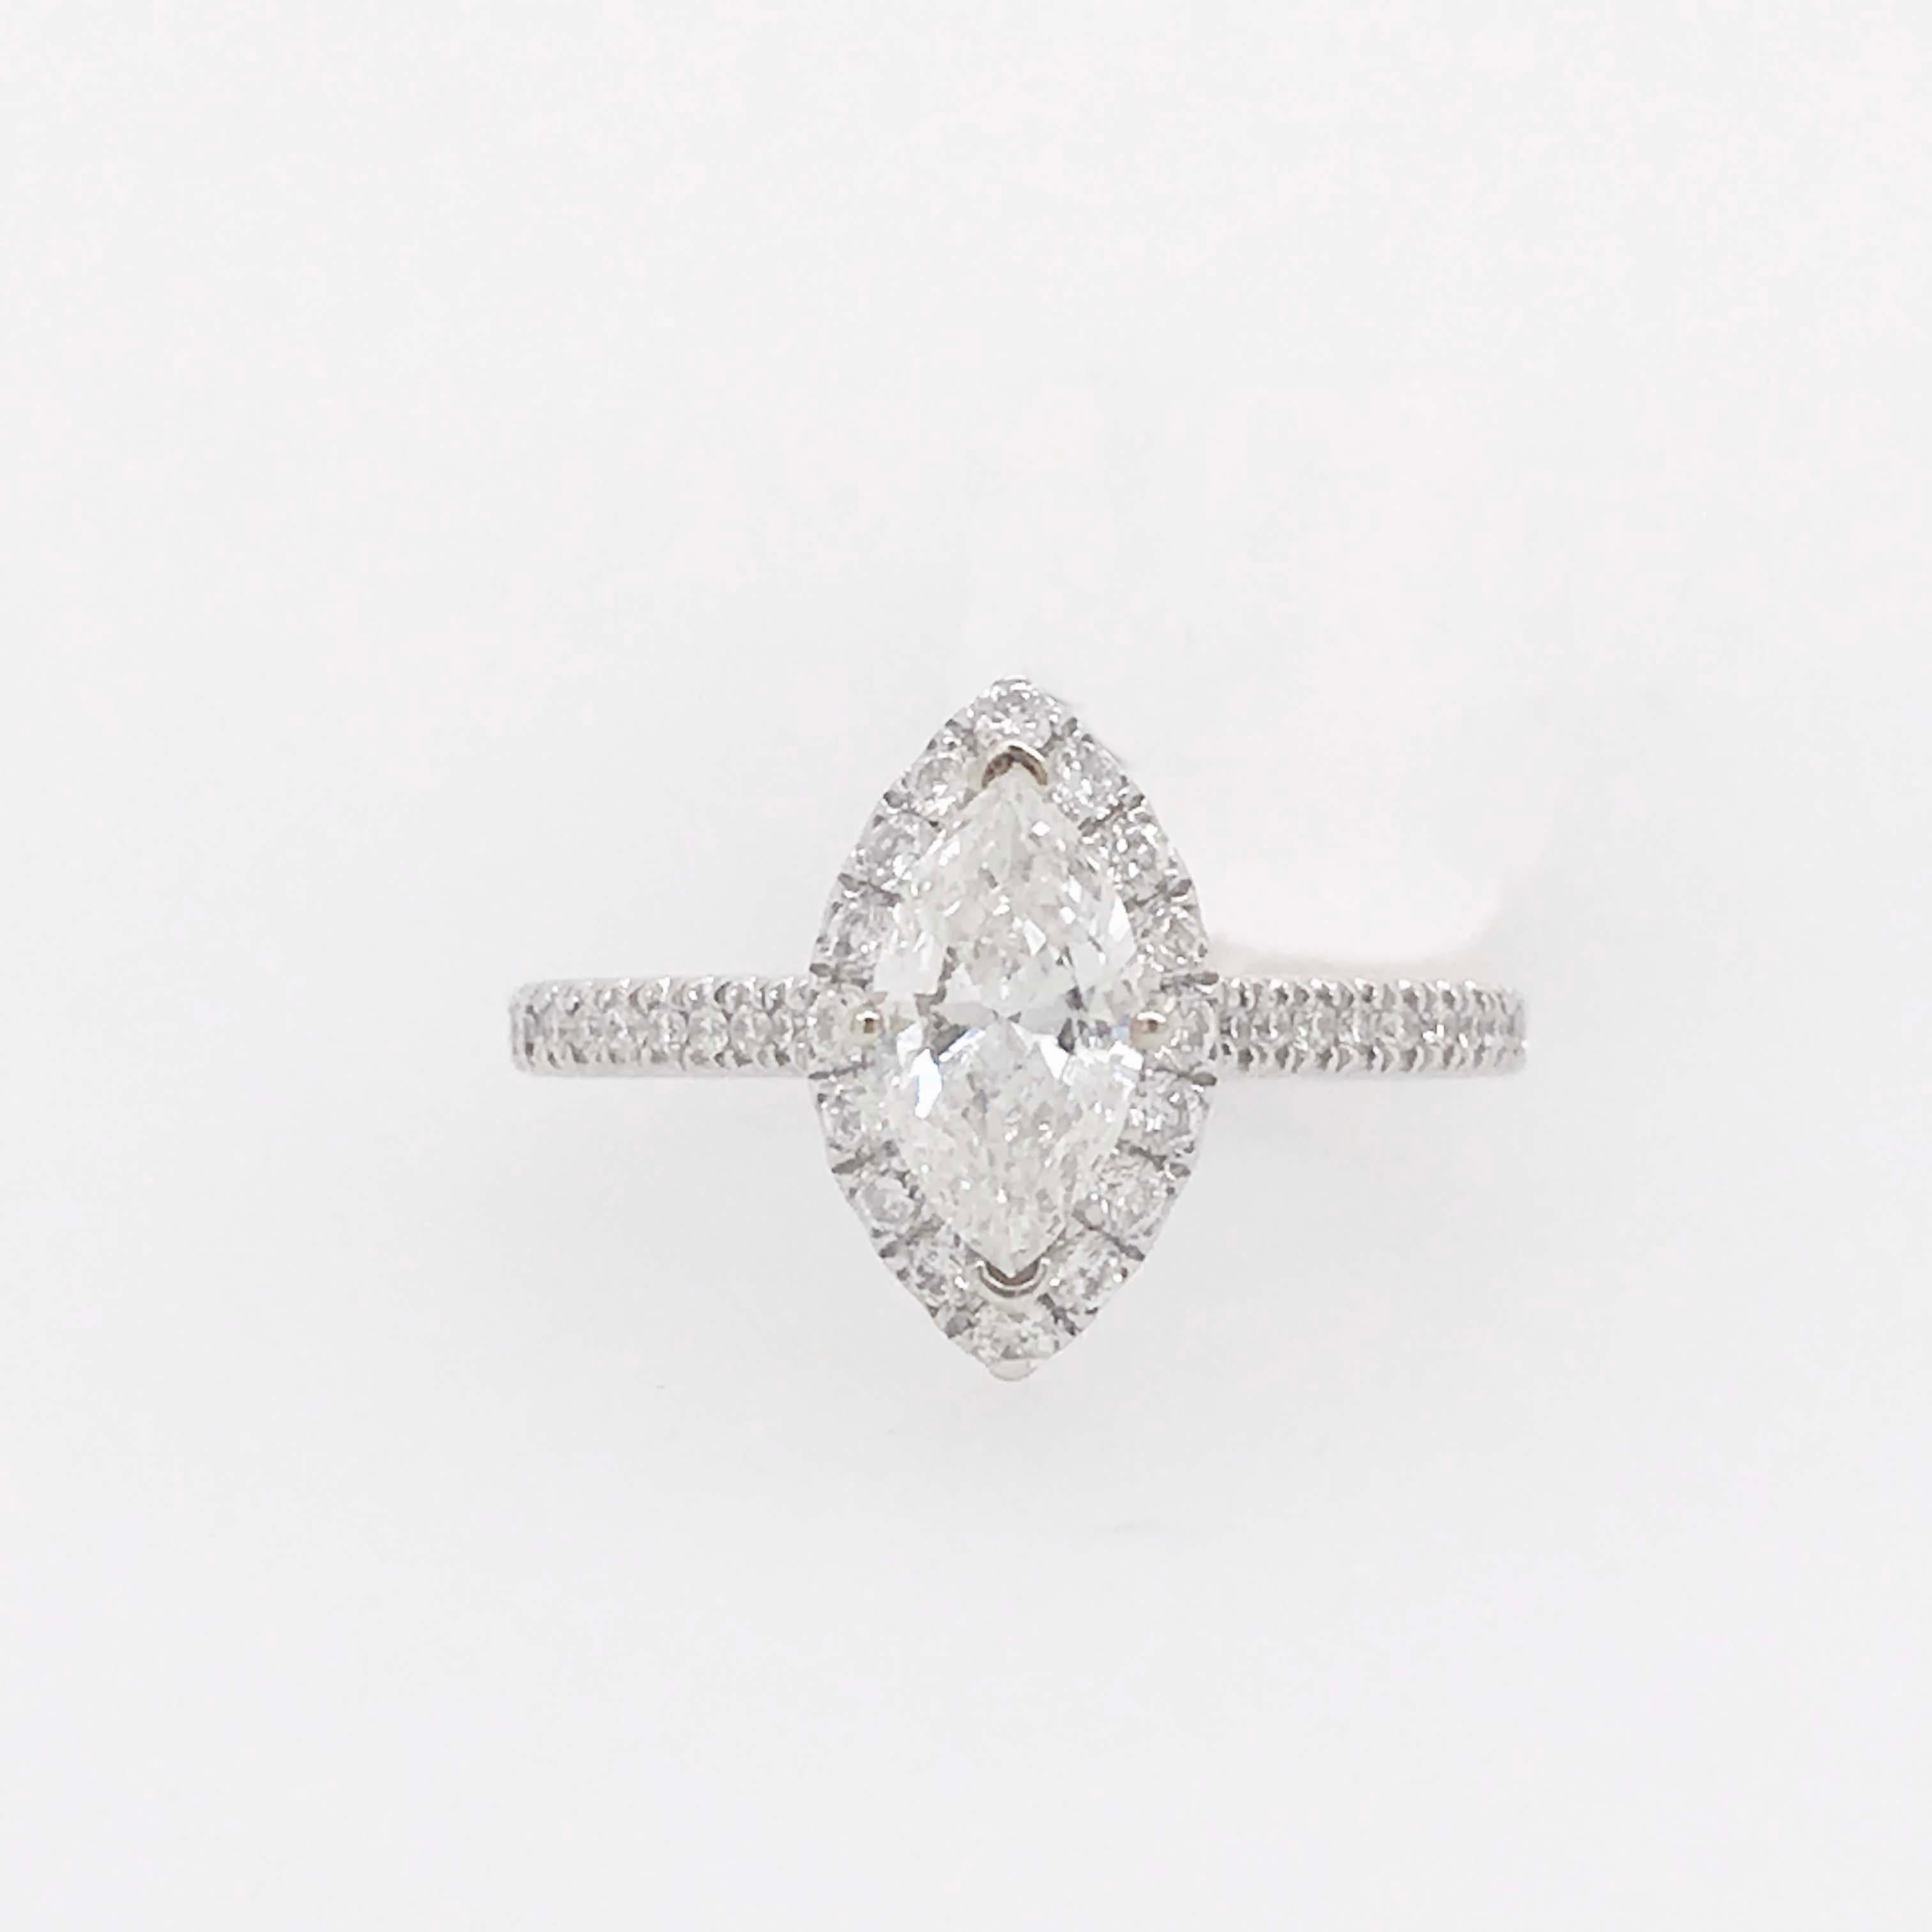 A beautiful diamond engagement ring with a .60 carat marquise diamond and .35 carat diamond halo. The center diamond is a beautiful marquise shape with a bright white F color grade and an eye clean SI-1 clarity grade. The marquise shaped halo frames